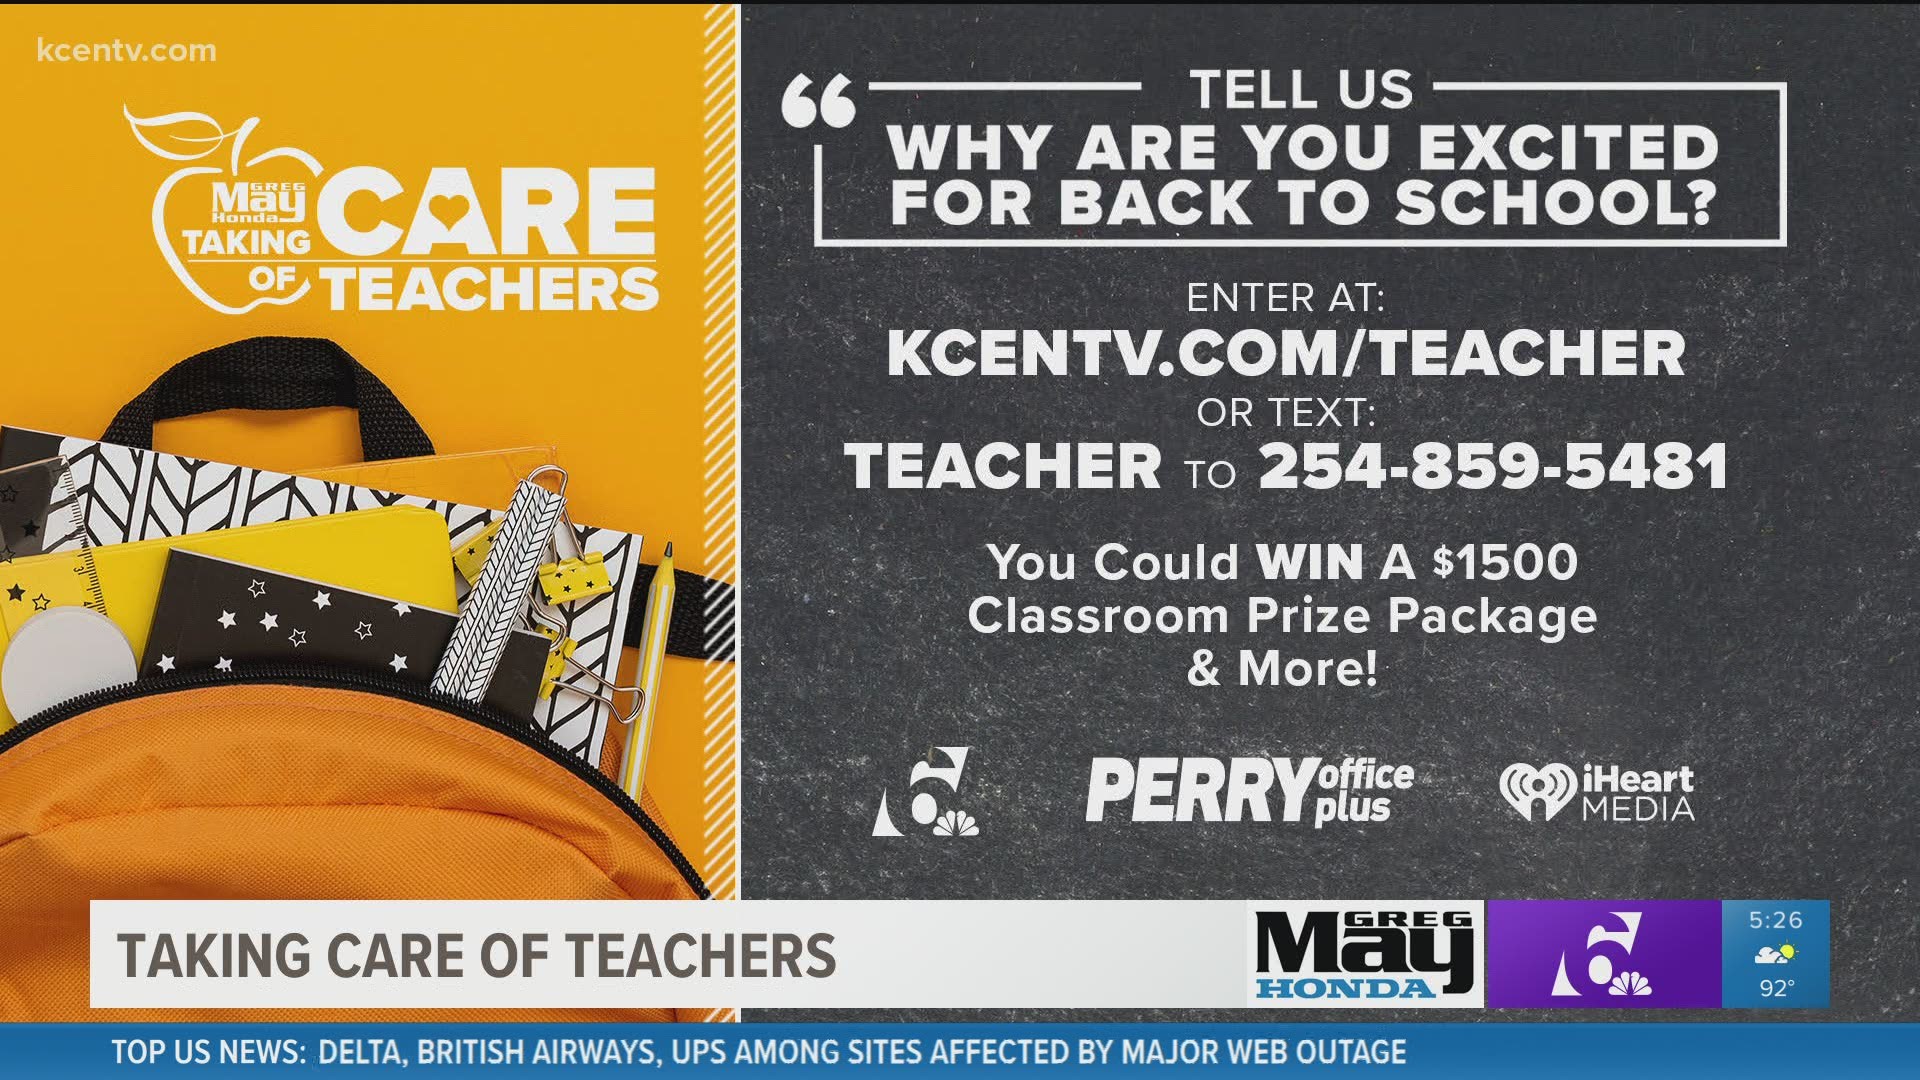 6 News is teaming up with Greg May Honda to recognize the hard working teachers in Central Texas. To win, tell us why you are excited to go back to school.